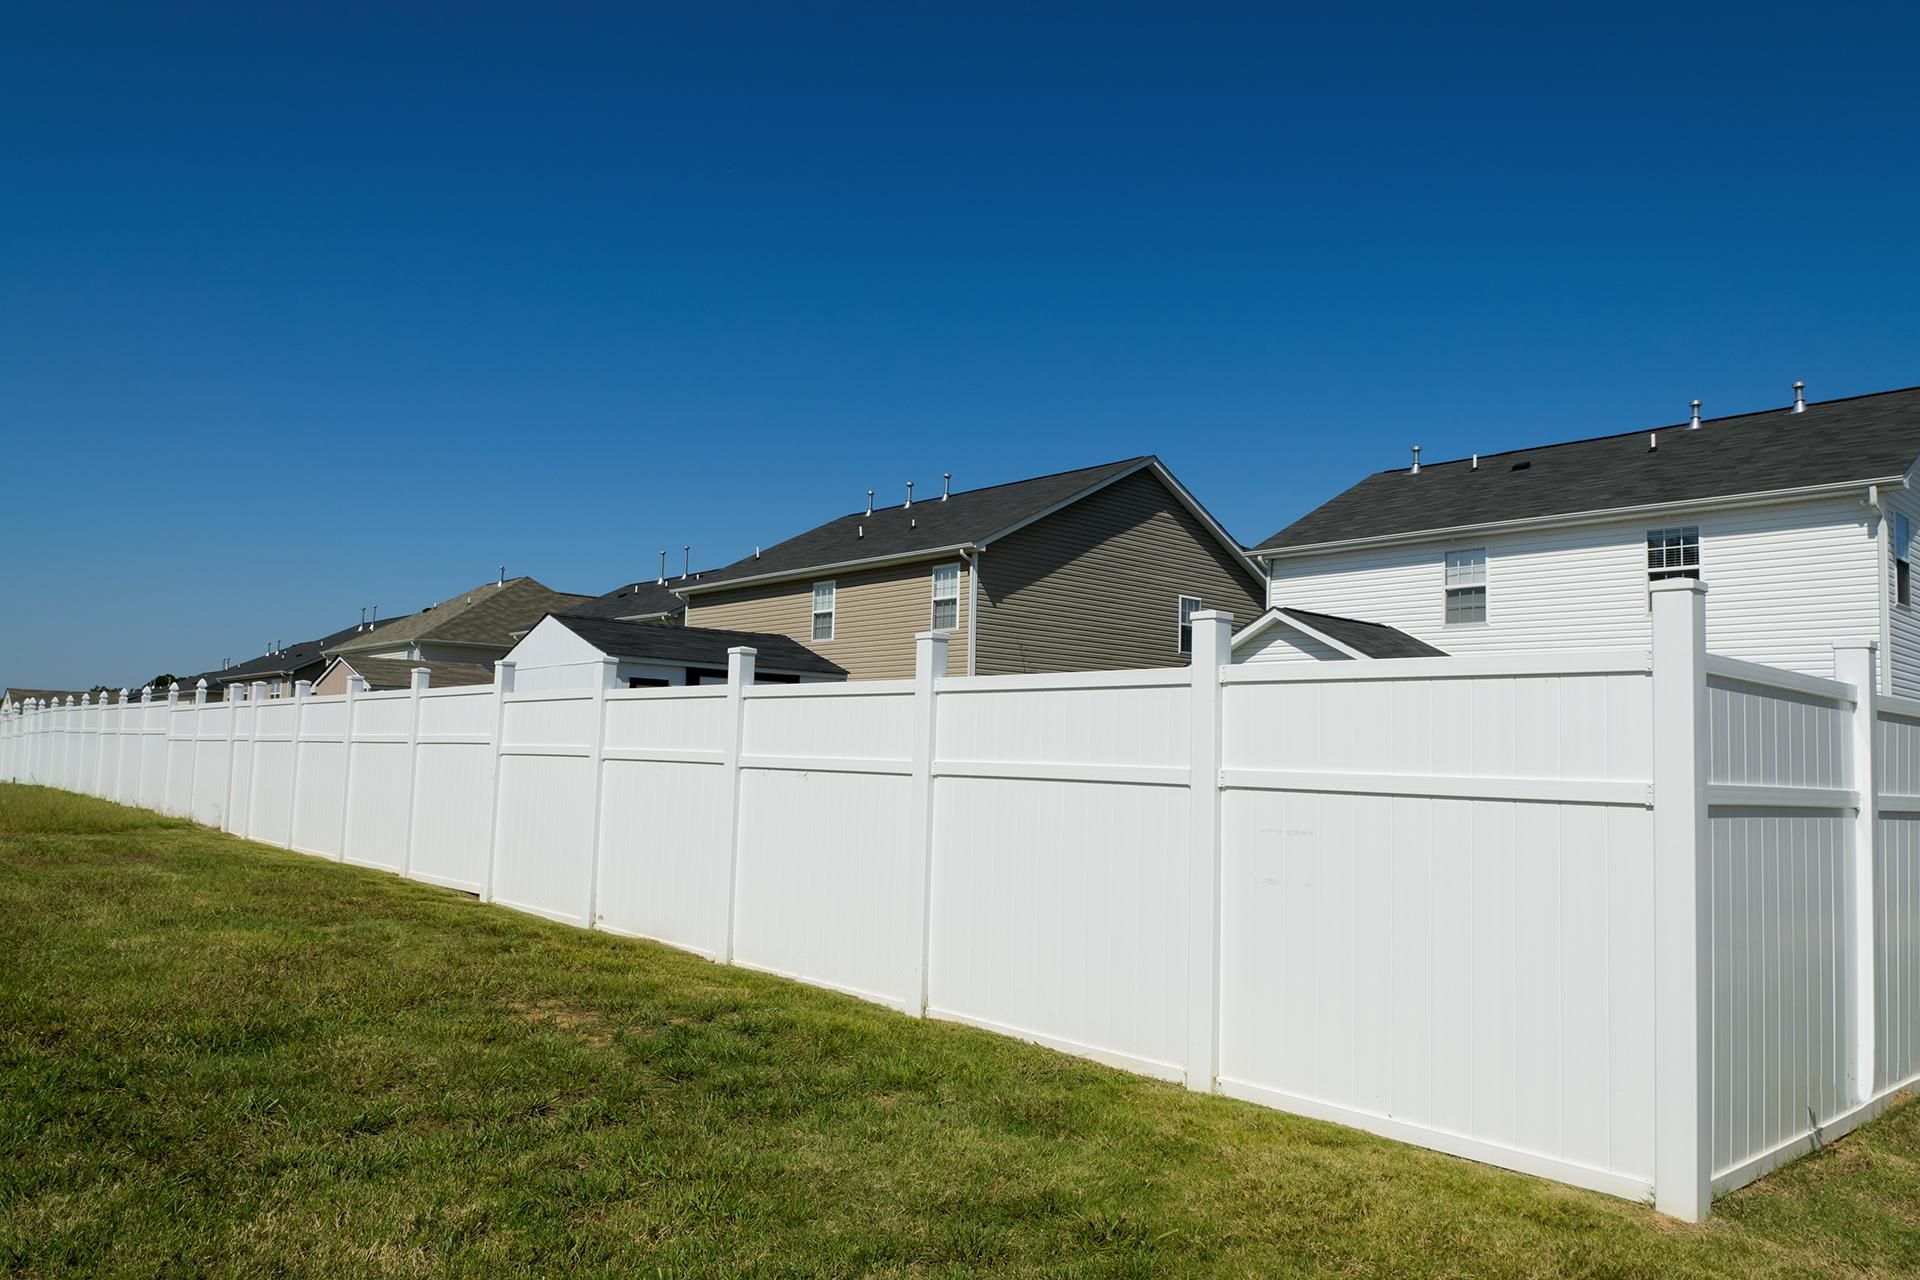 a white fence surrounds a lush green field in front of a row of houses .